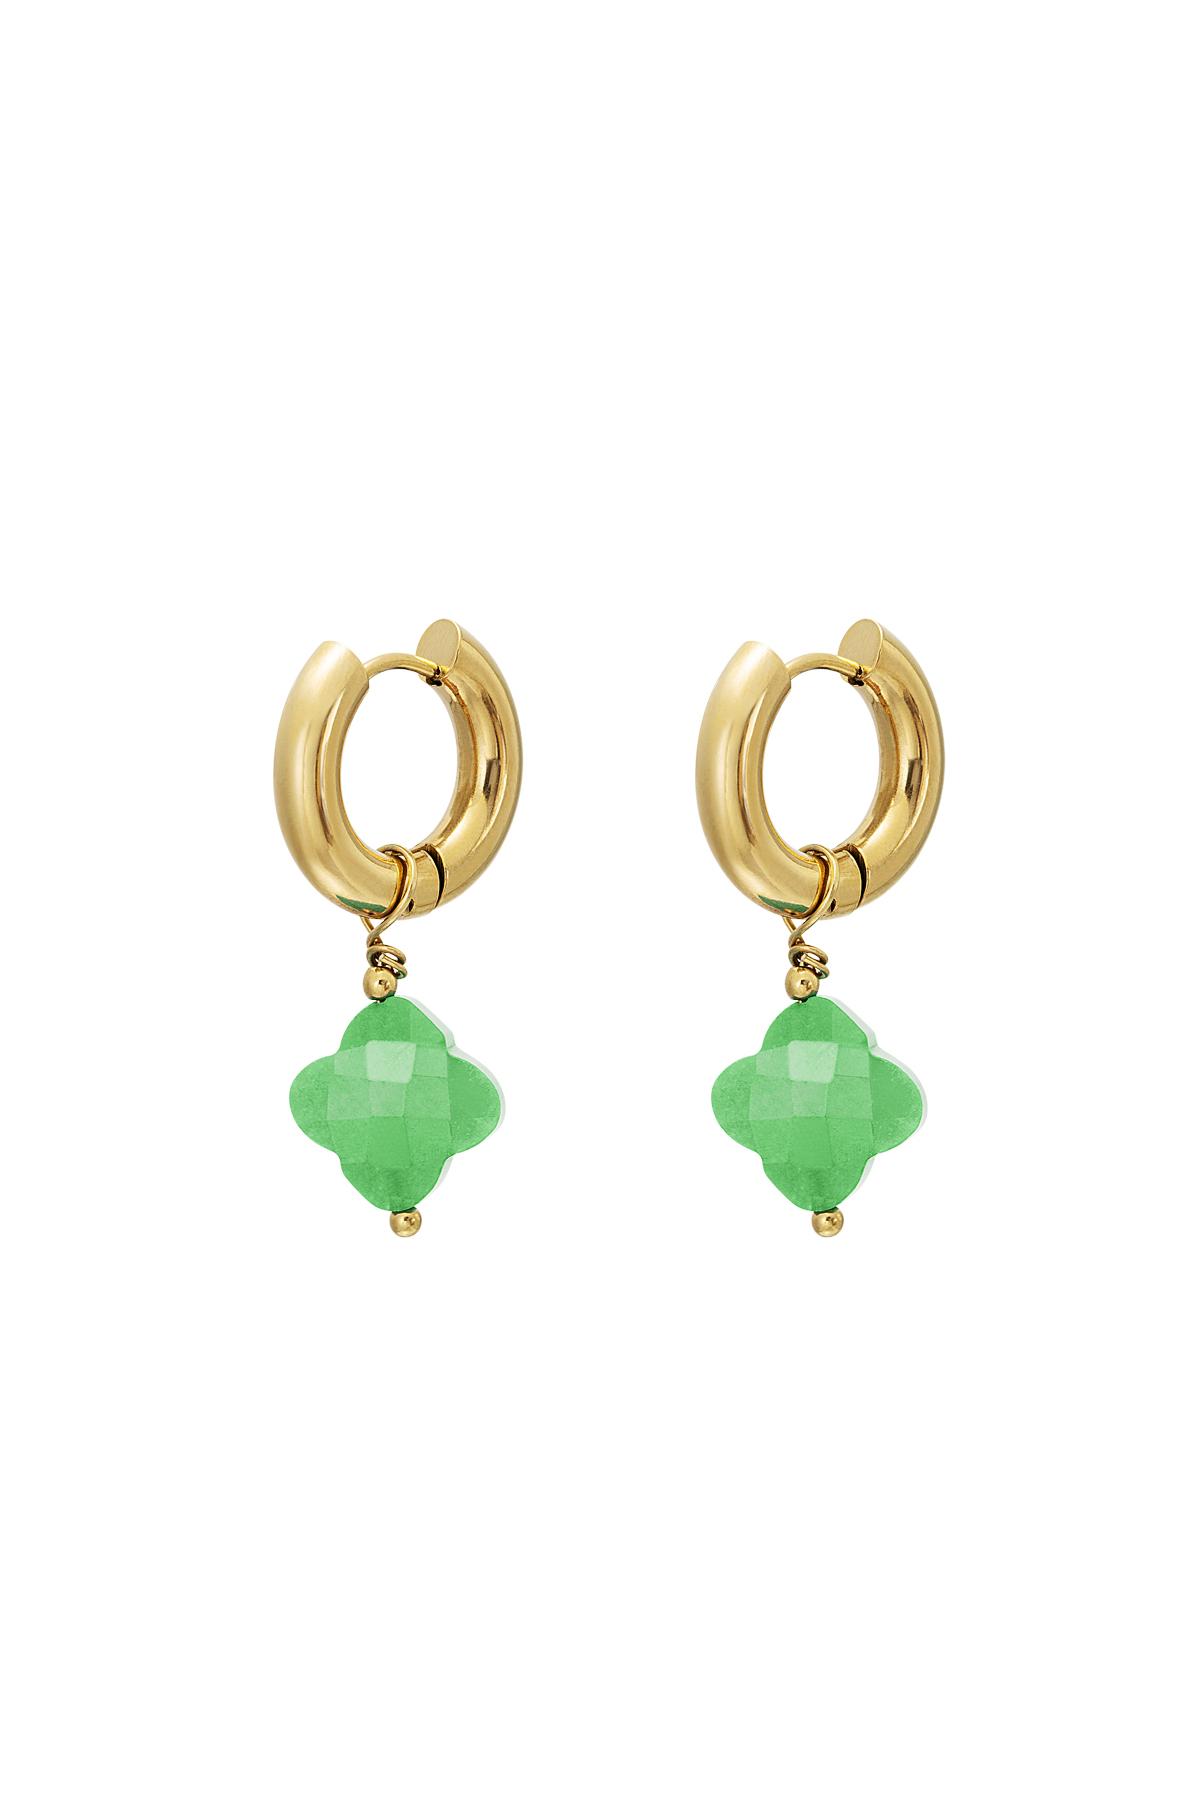 Clover earrings - #summergirls collection Green &amp; Gold Stainless Steel